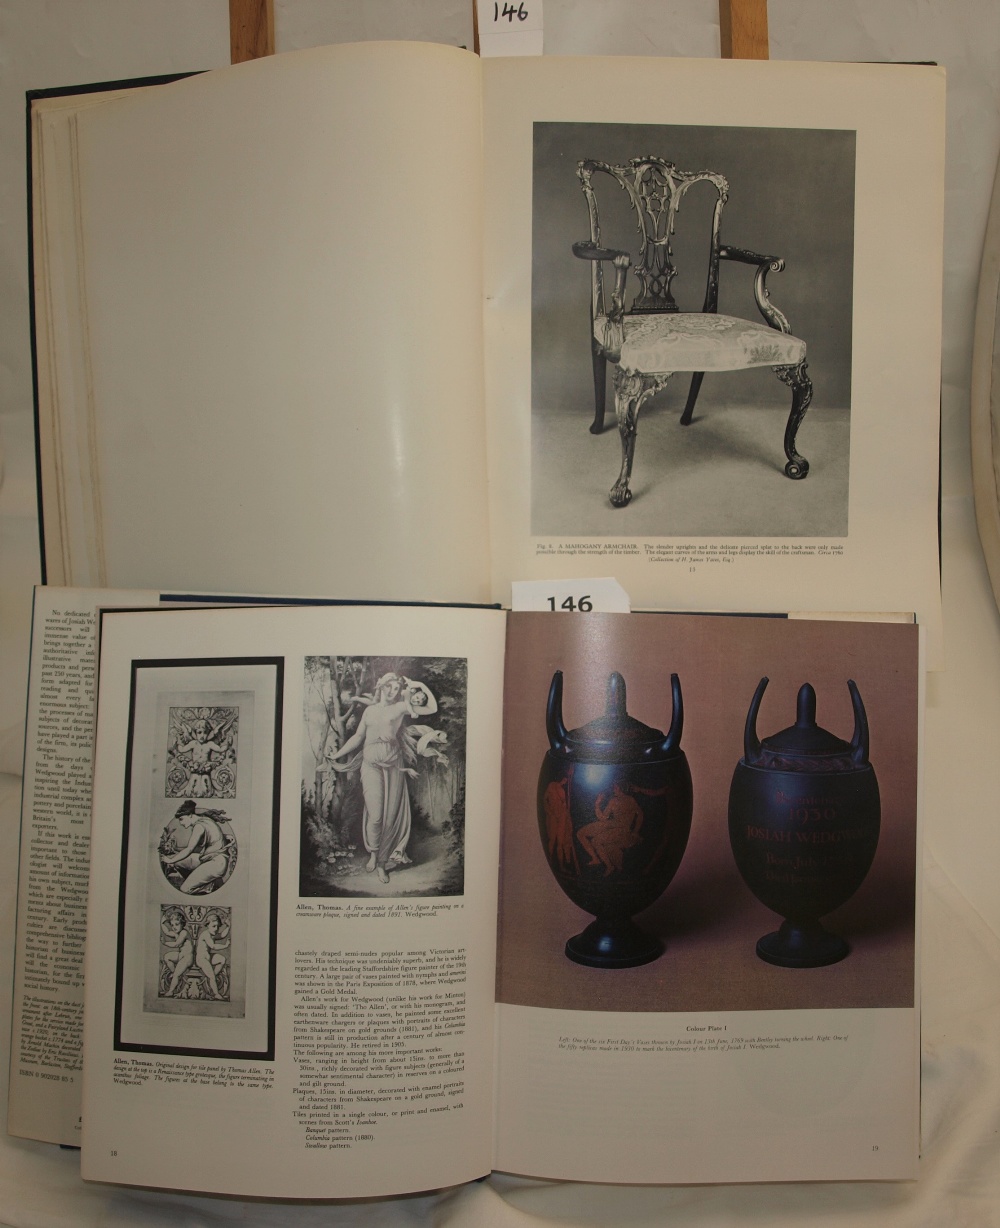 2 Books - "Masterpieces of English Furniture and Clocks", R.W. Symonds, 1940, signed by the - Image 2 of 3